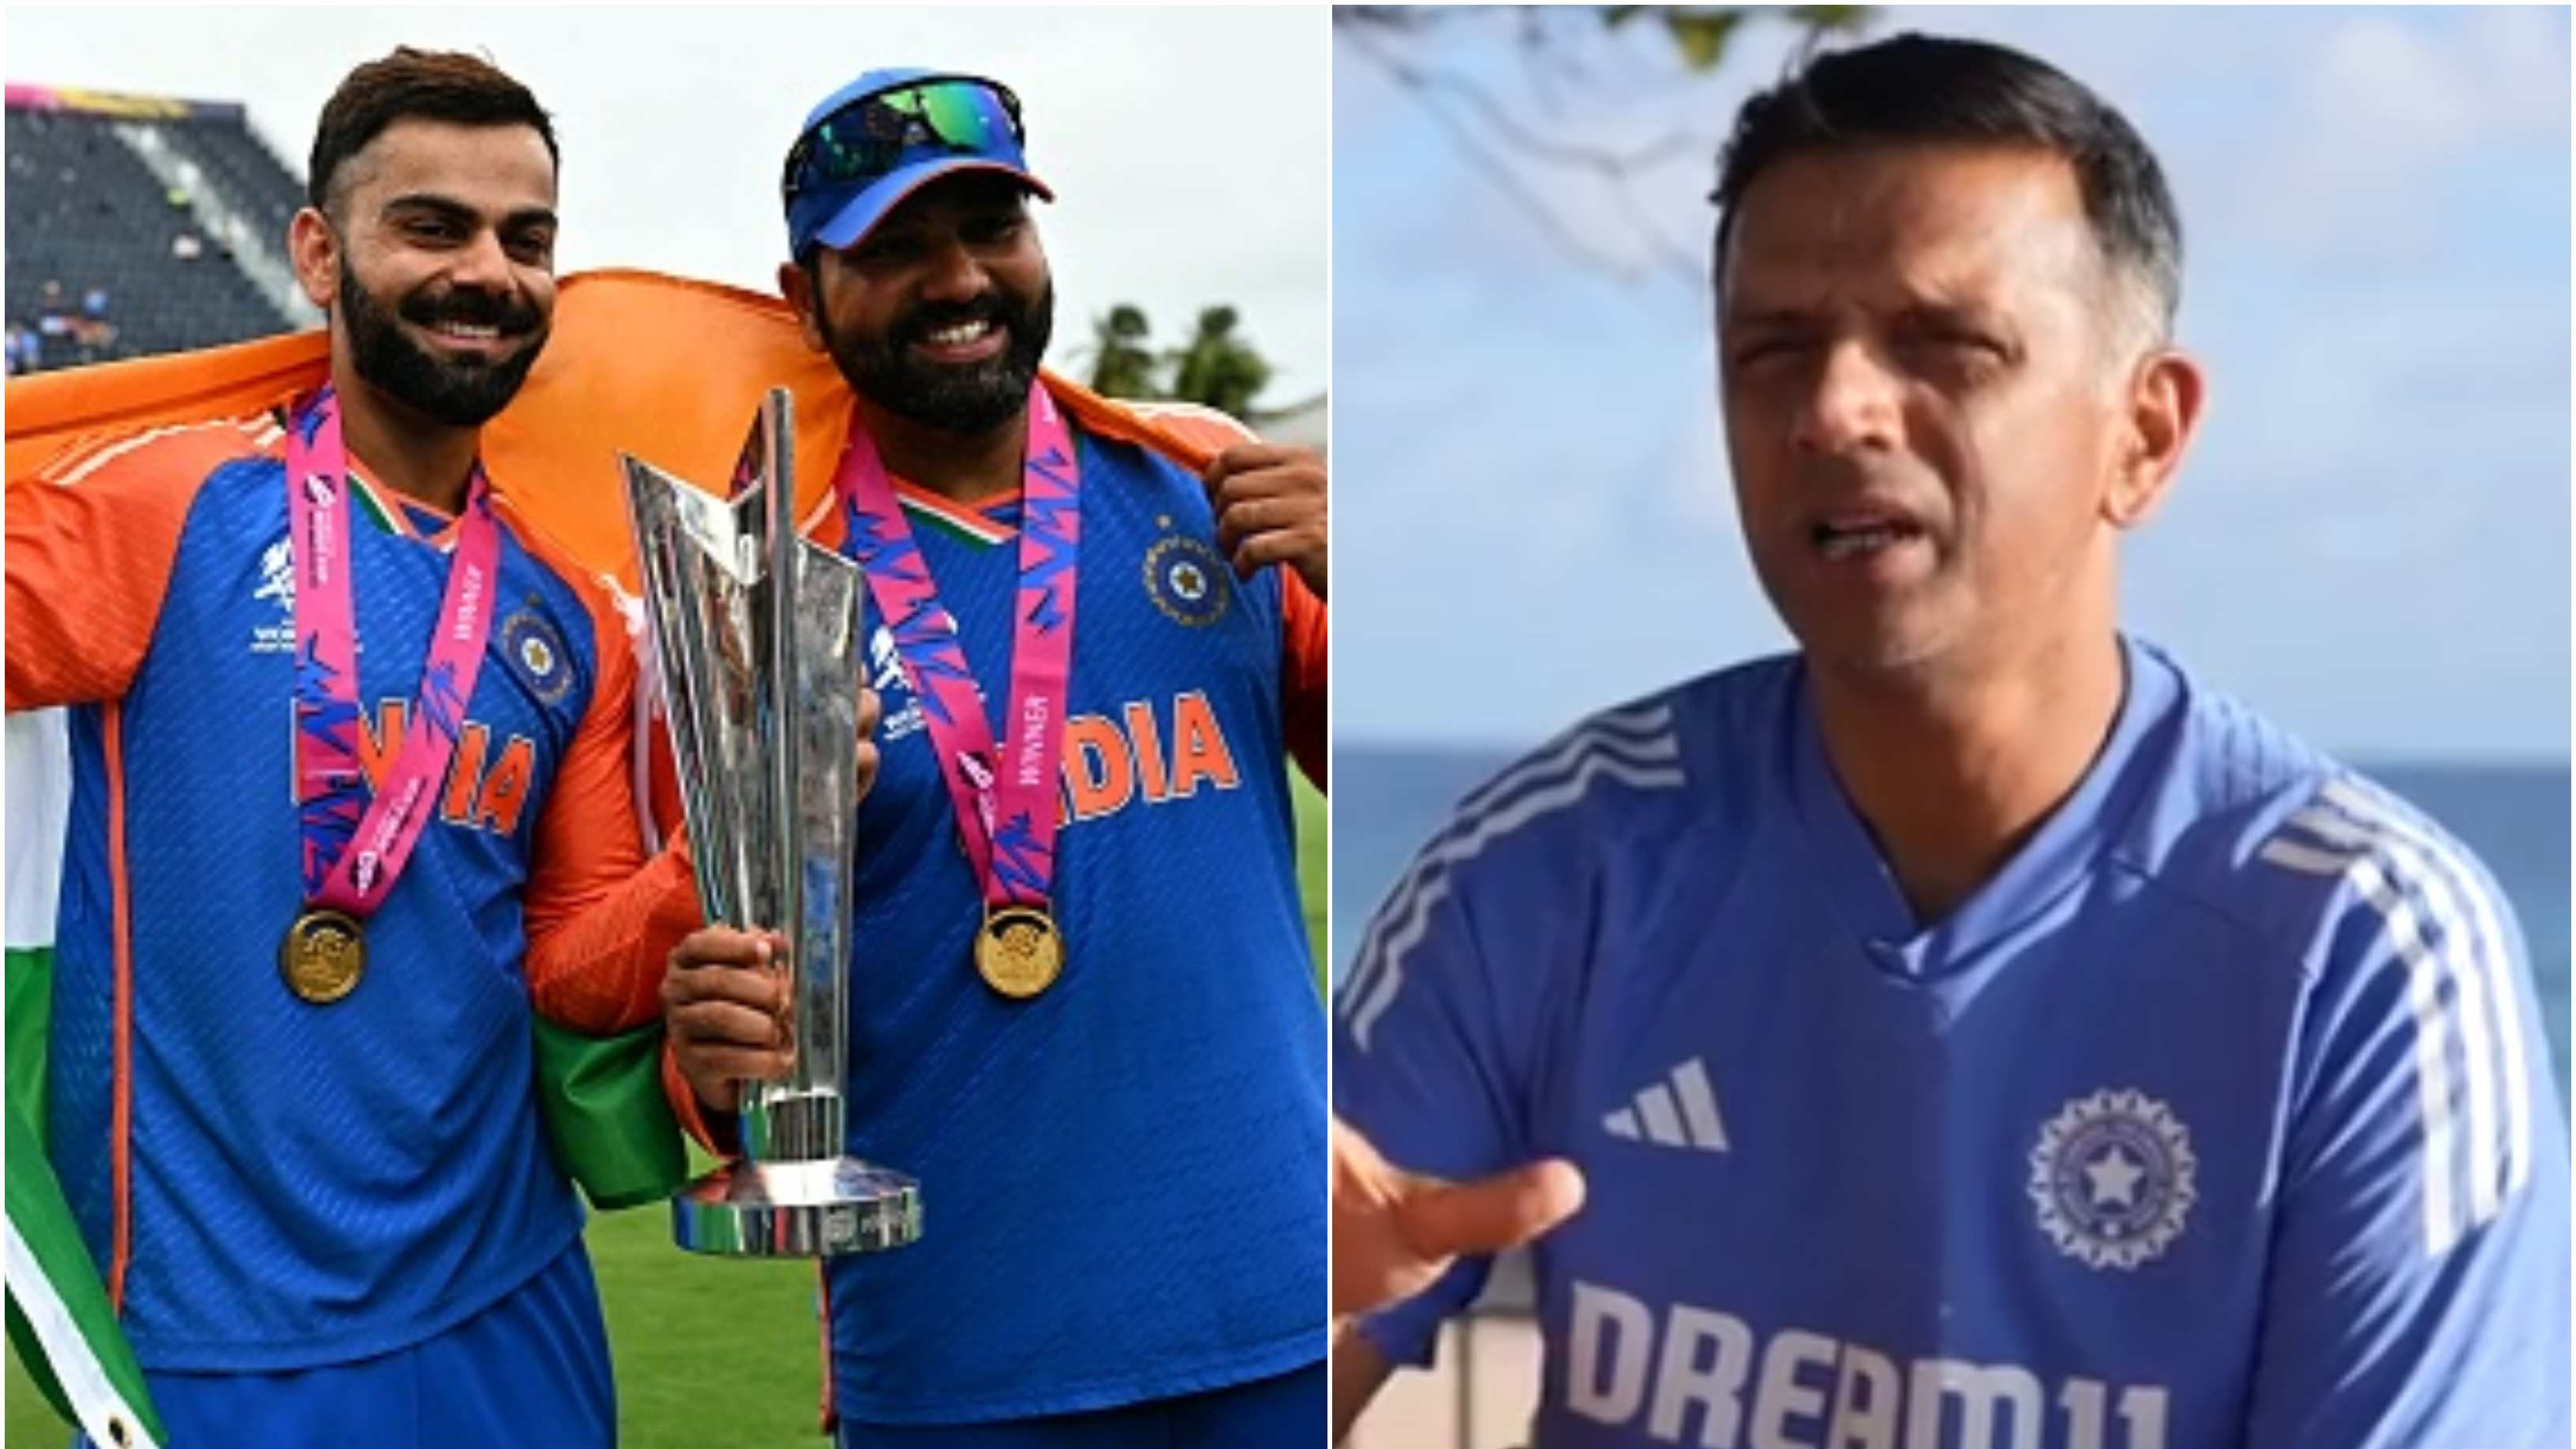 WATCH: “Got to know them a little more”: Dravid opens up on his bond with Rohit, Kohli as he reflects on India head coach tenure